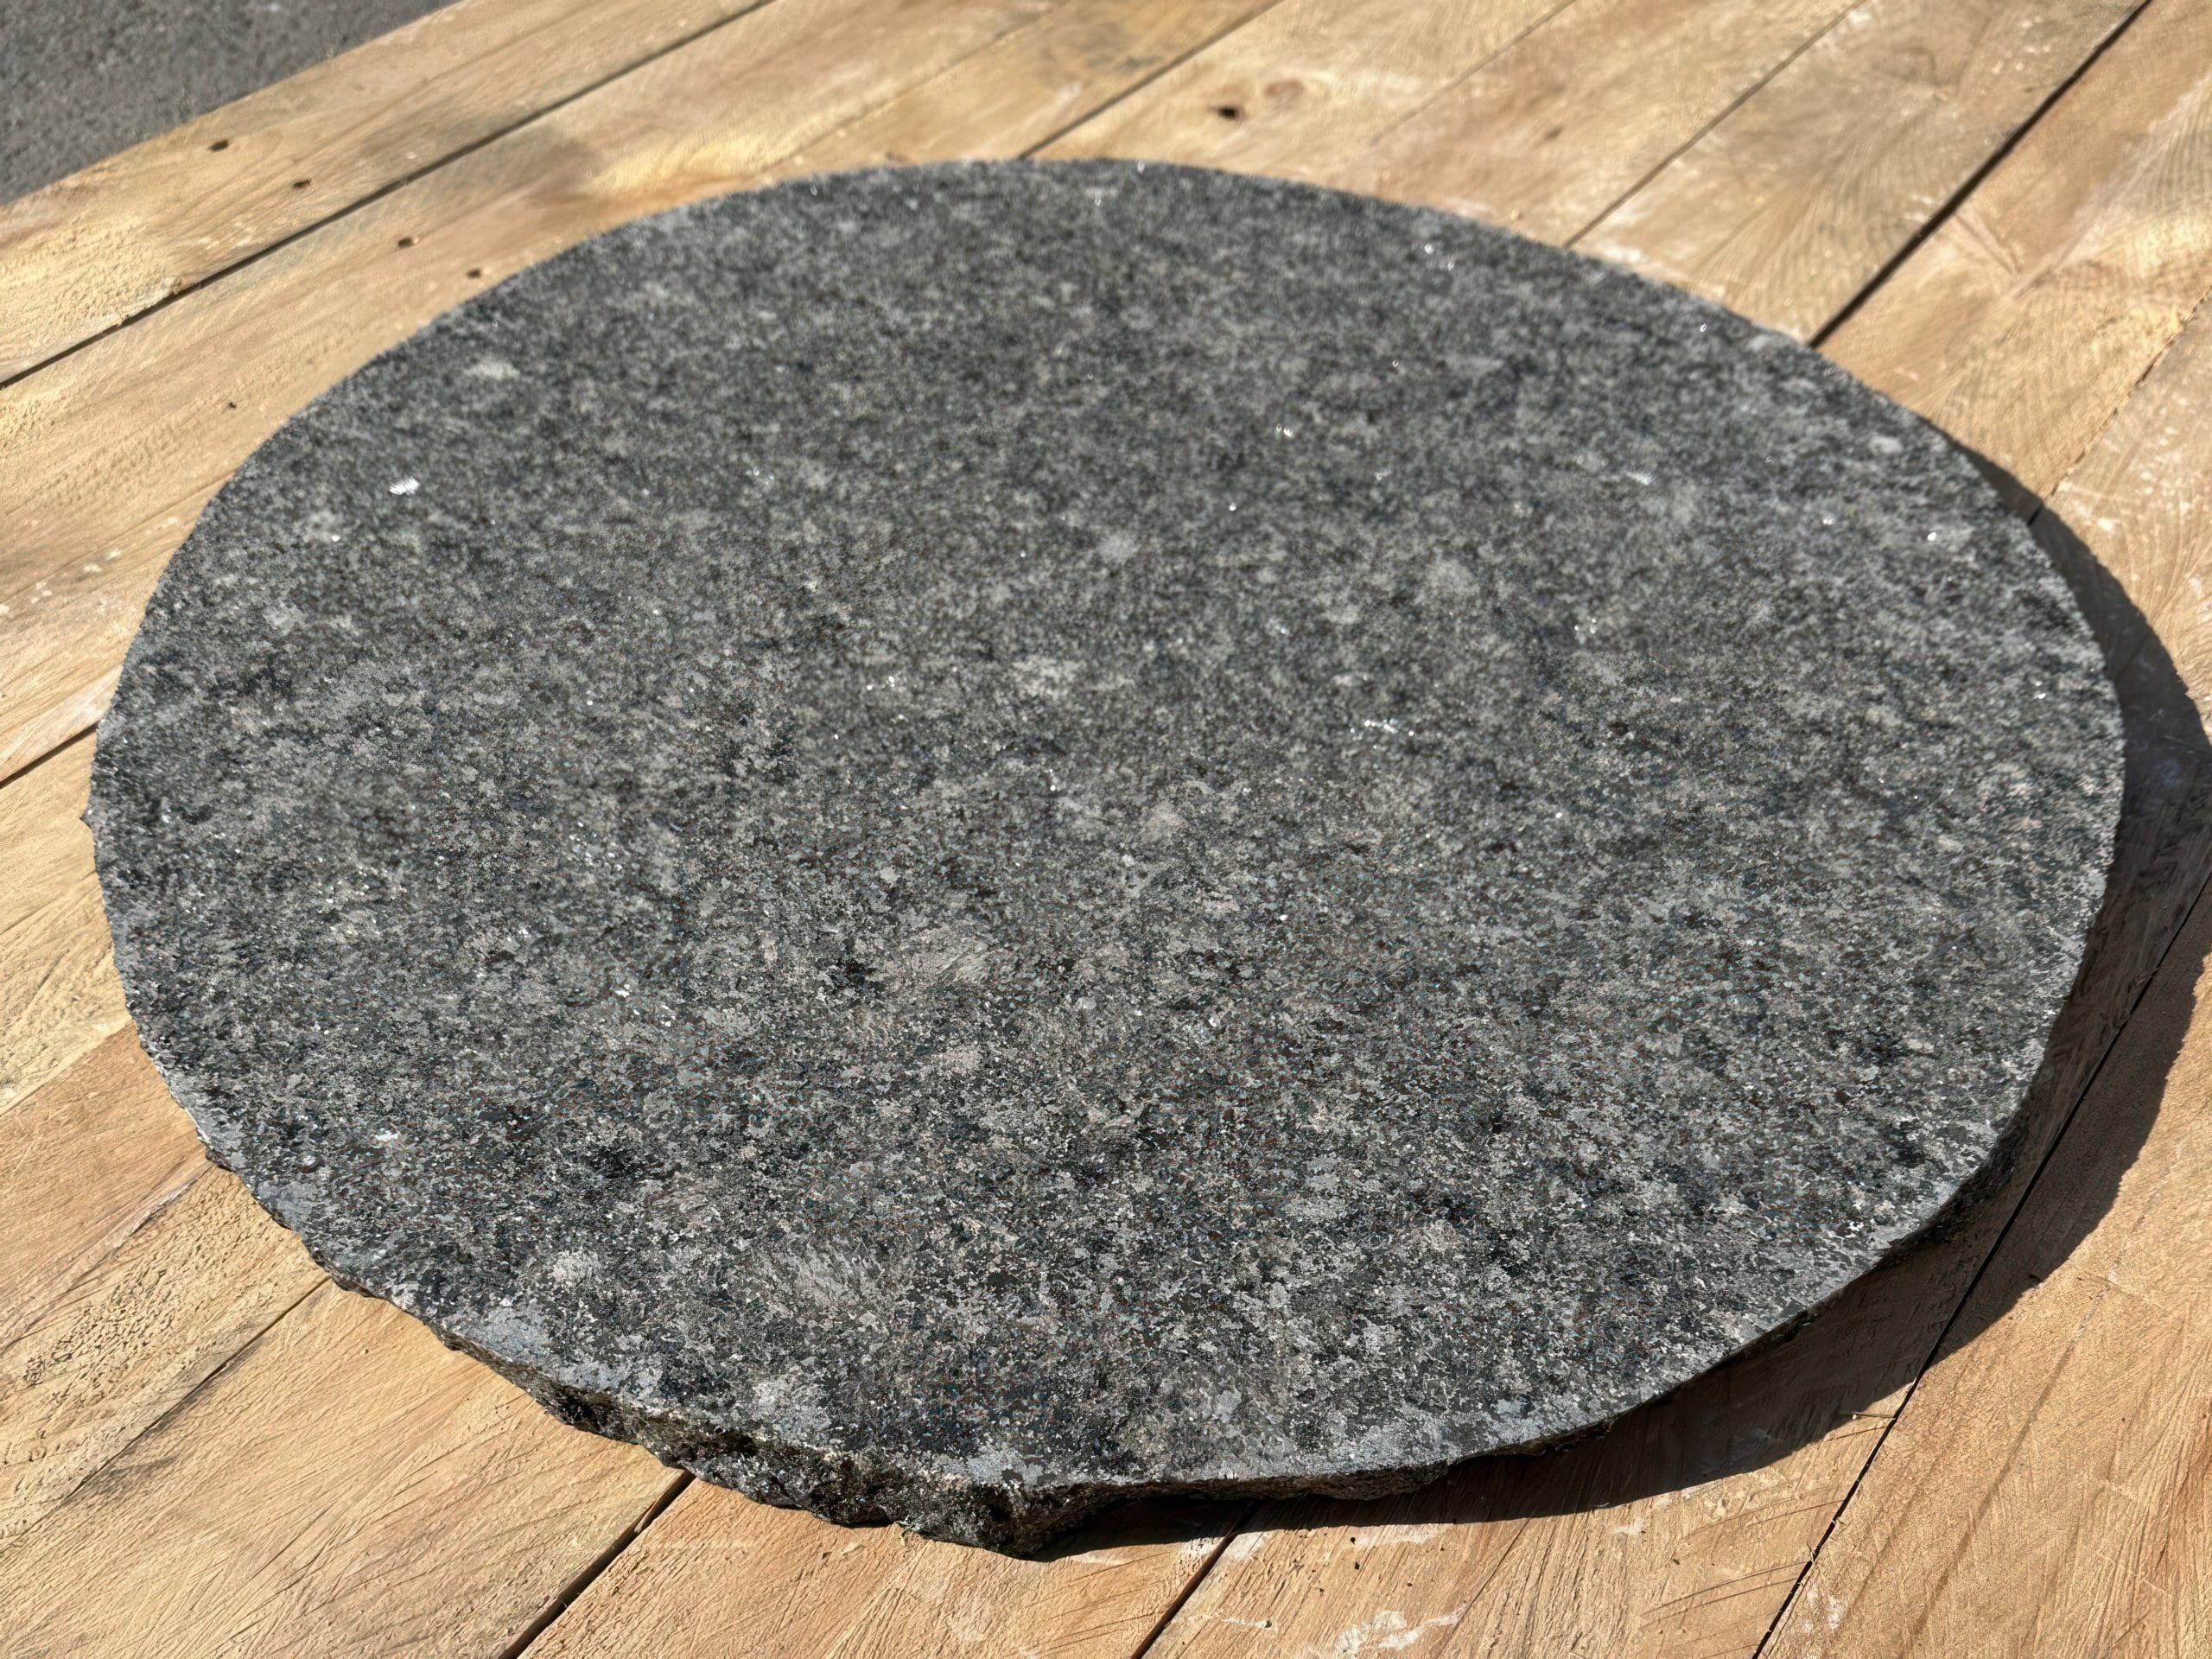 IMPALA BLACK GRANITE STEPPING STONES_RMS TRADERS_NATURAL STONE SUPPLIER MELBOURNE (4))